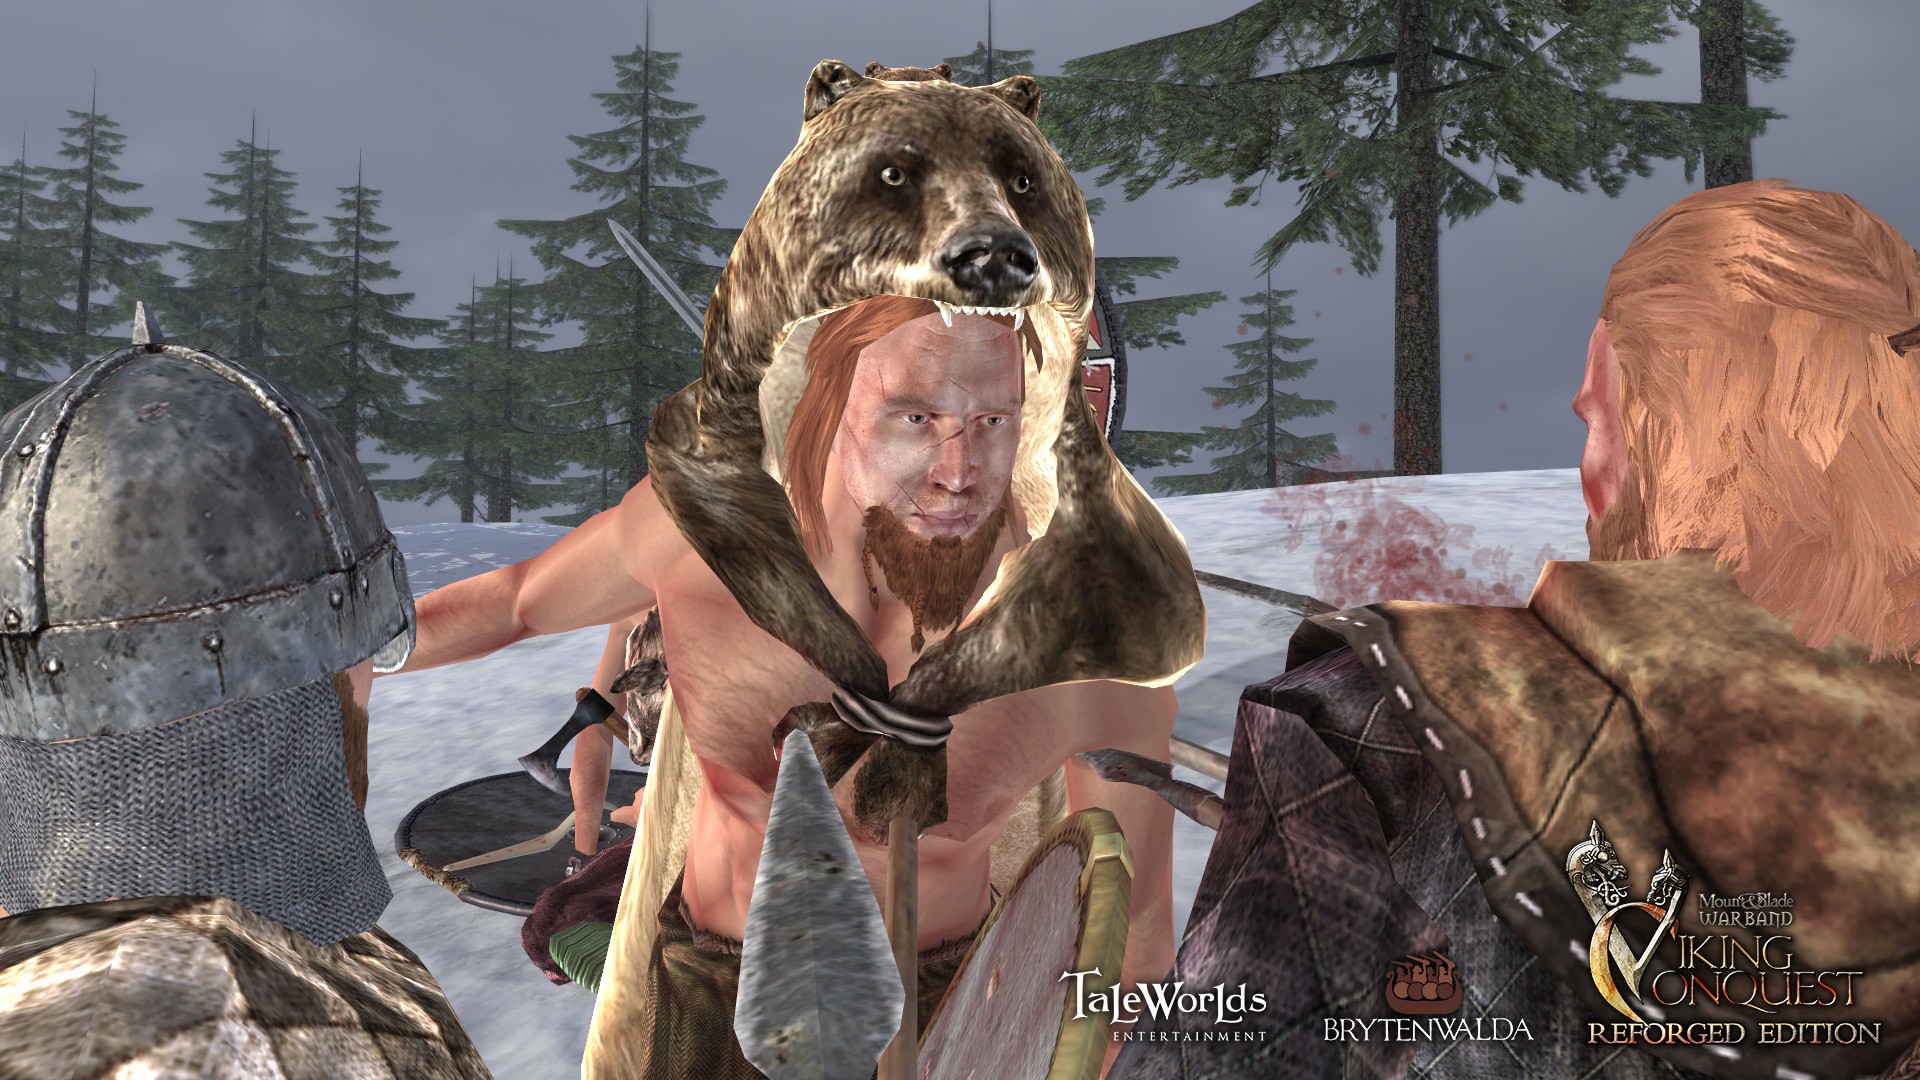 mount and blade warband bear force 2